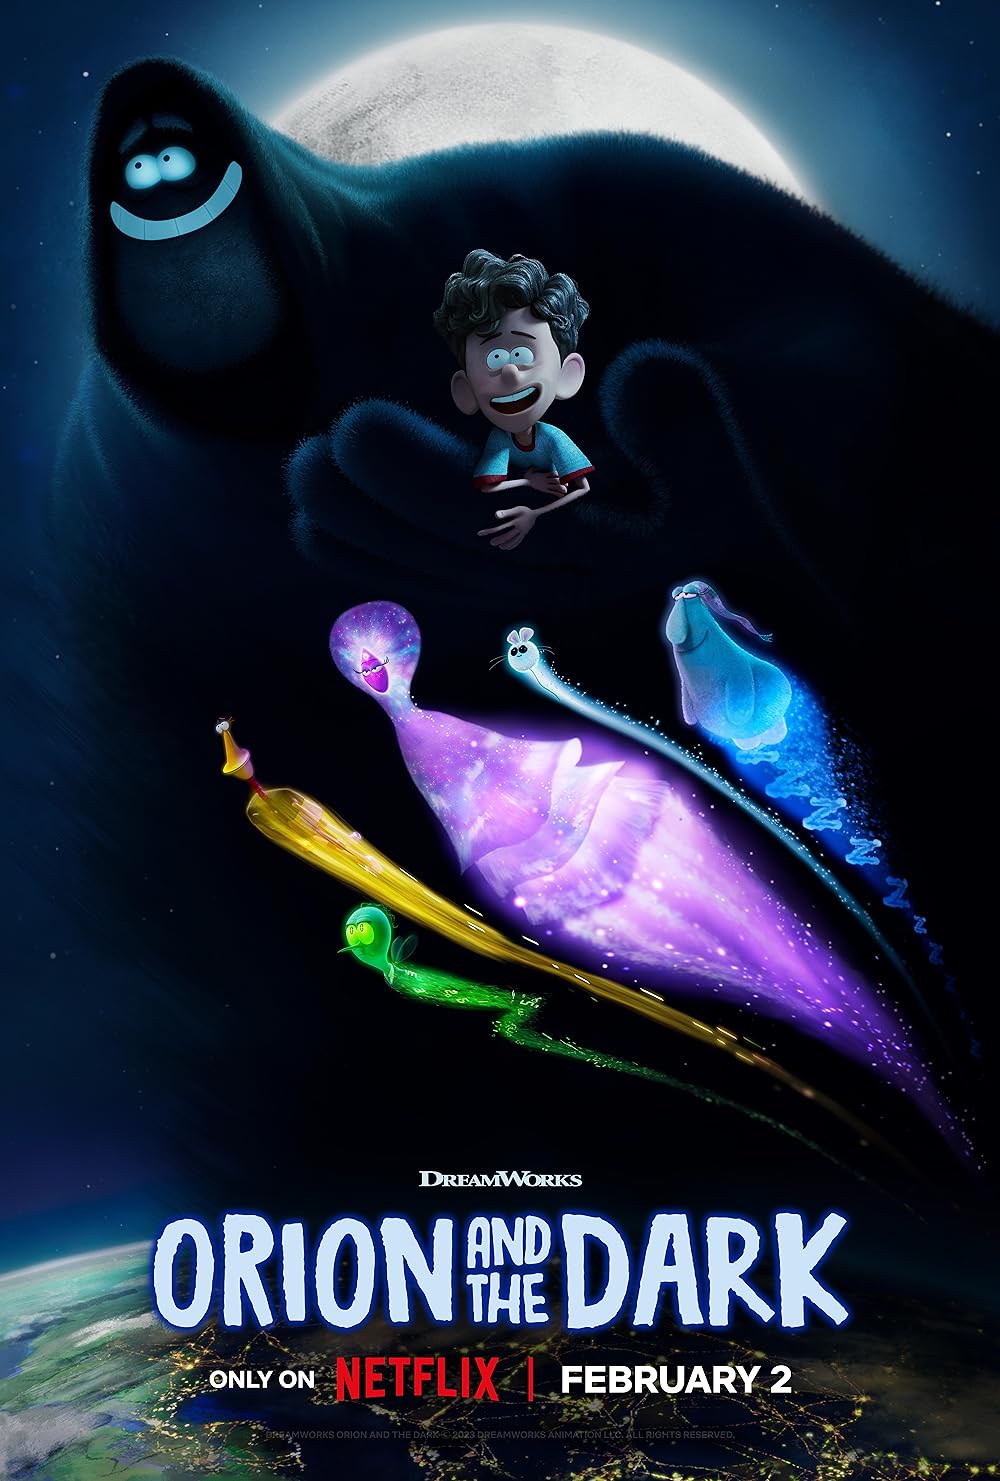 Orion and the Dark (February 2) - NetflixFollowing Orion, a young boy afraid of heights, pets, and the dark, the animated series takes him on a nighttime trip to prove that the only thing to fear is fear itself. Streaming on Netflix from February 2.